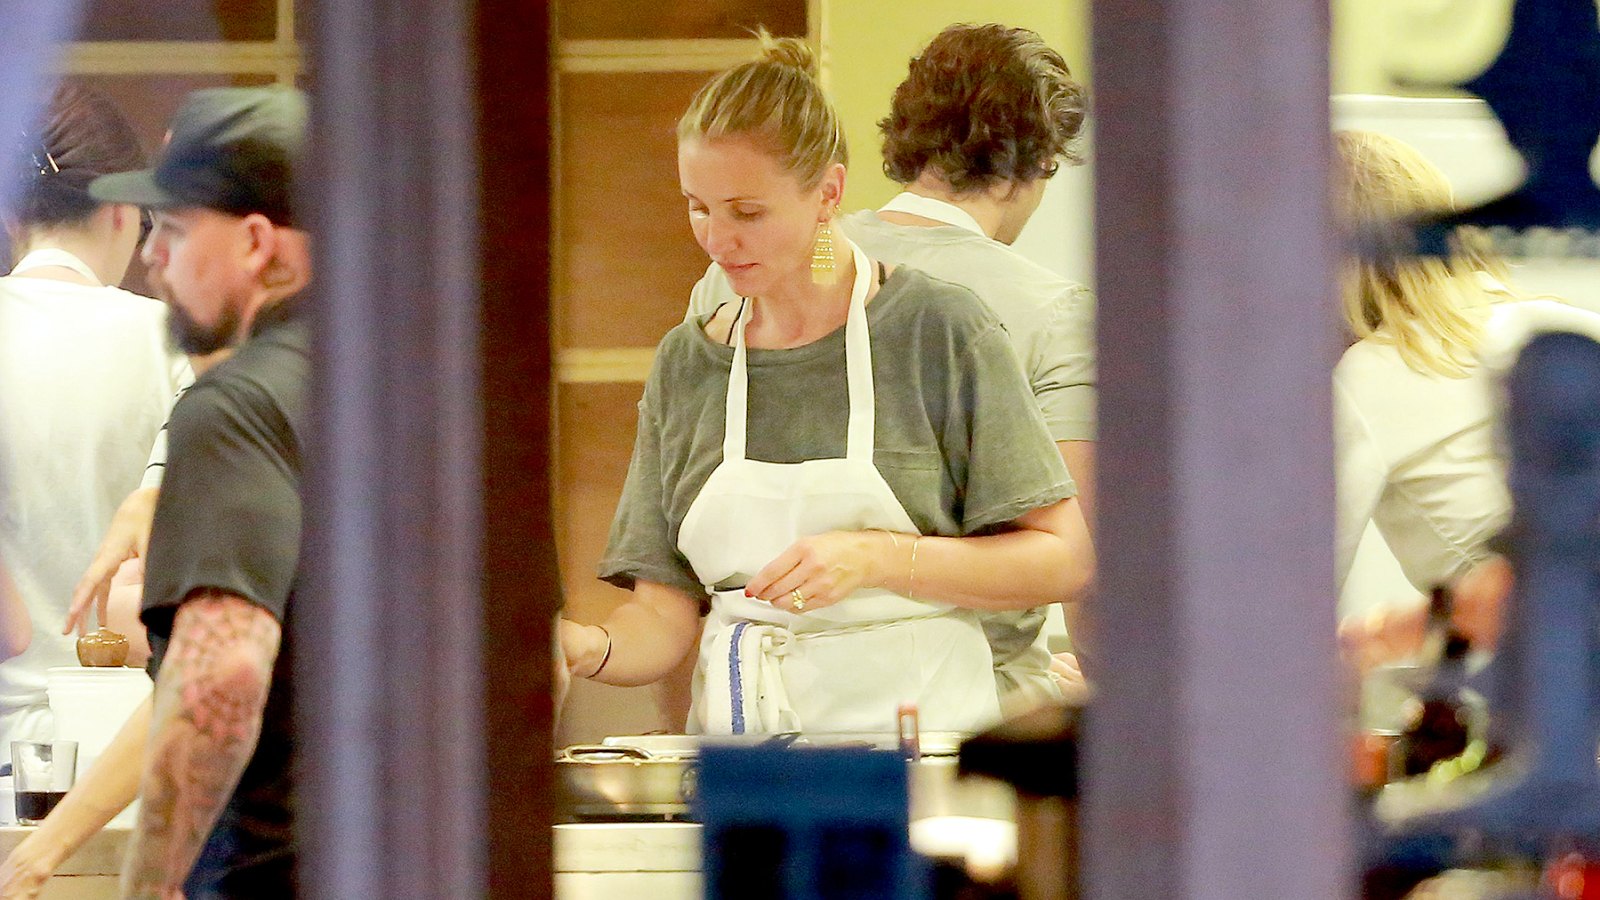 Cameron Diaz rang in her 44th birthday with her closest friends at loved ones at New School of Cooking in Culver City.